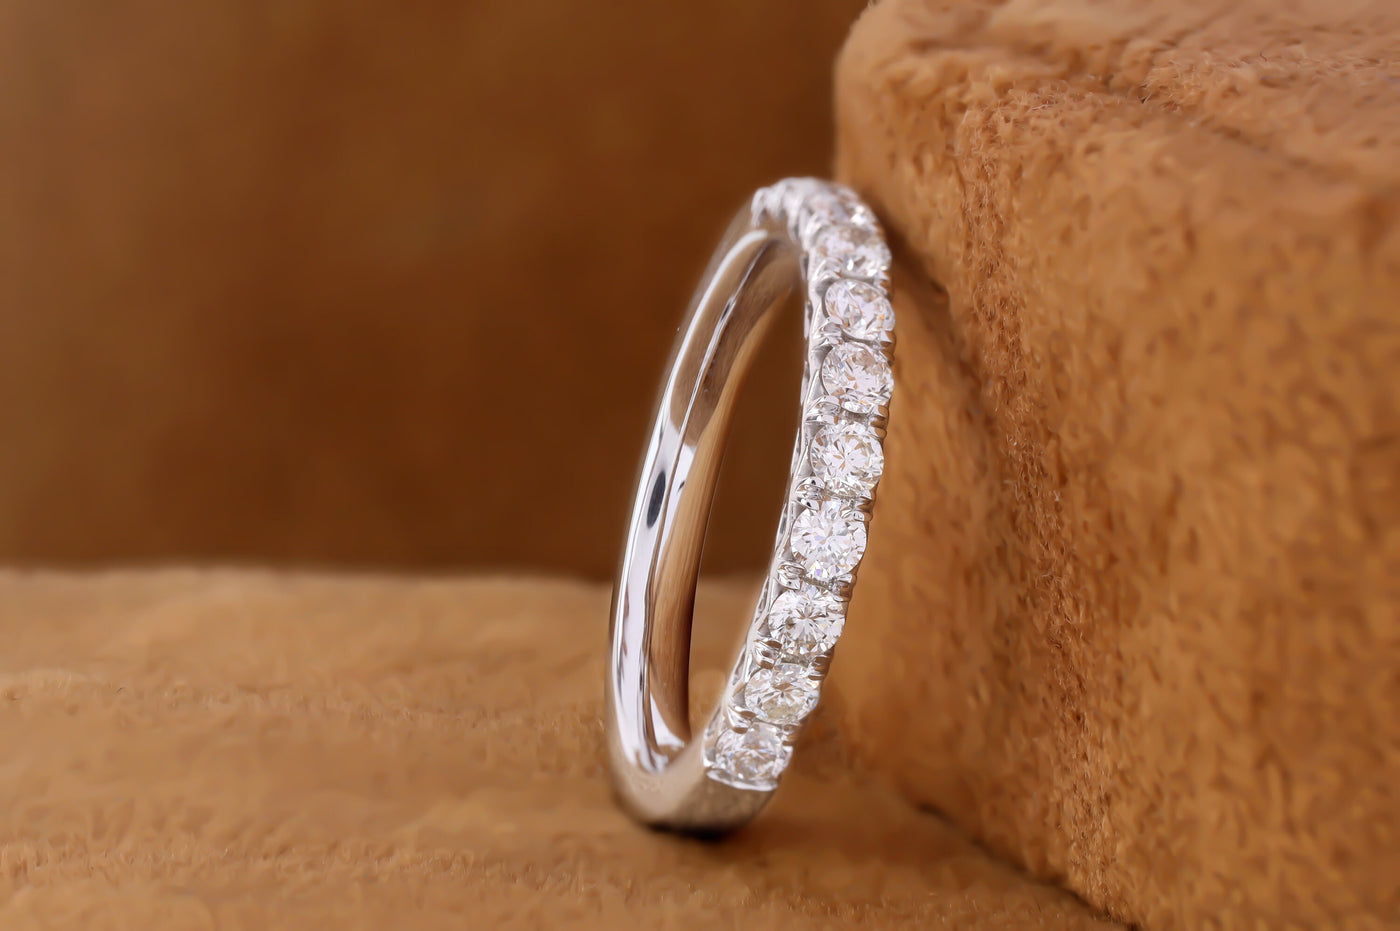 Solid 14K White Gold Band, Round Cut Moissanite Band, Half Eternity Bridal Band, Round Colorless Moissanite Wedding Band, Proposal Band Gift